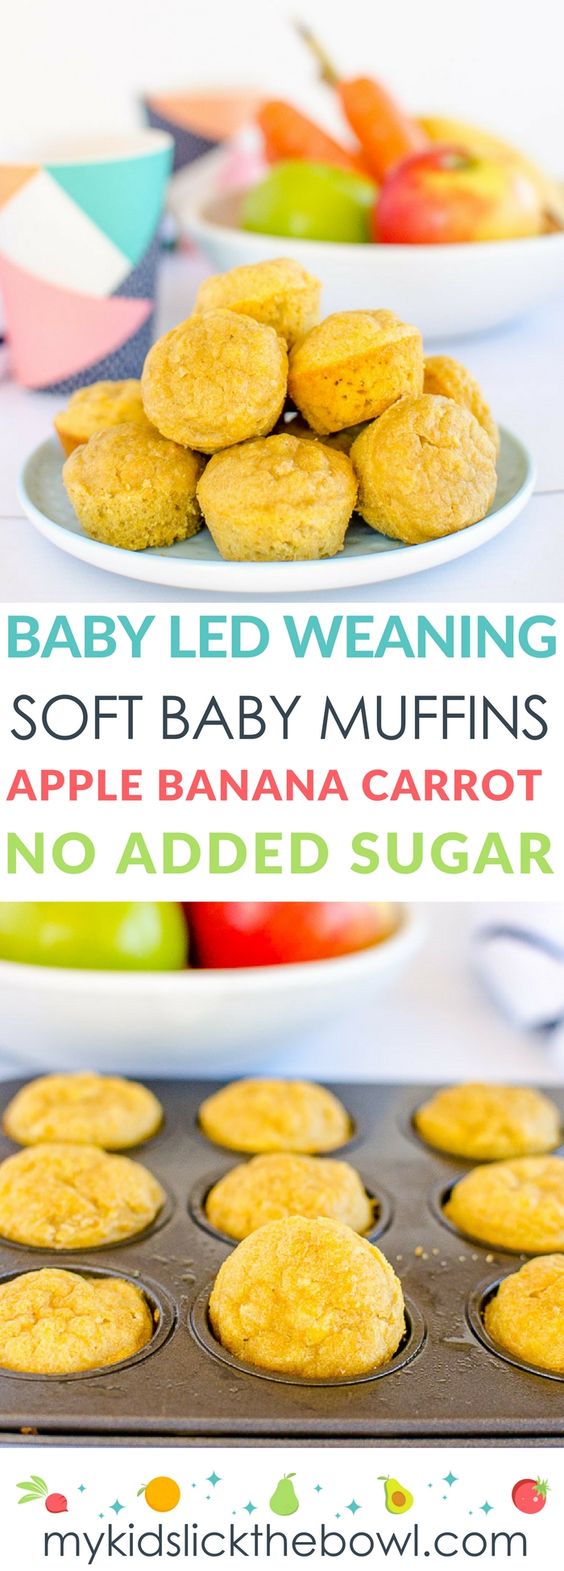 Baby Led Weaning Muffins Apple Banana and Carrot - The Dinner Recipes Ideas